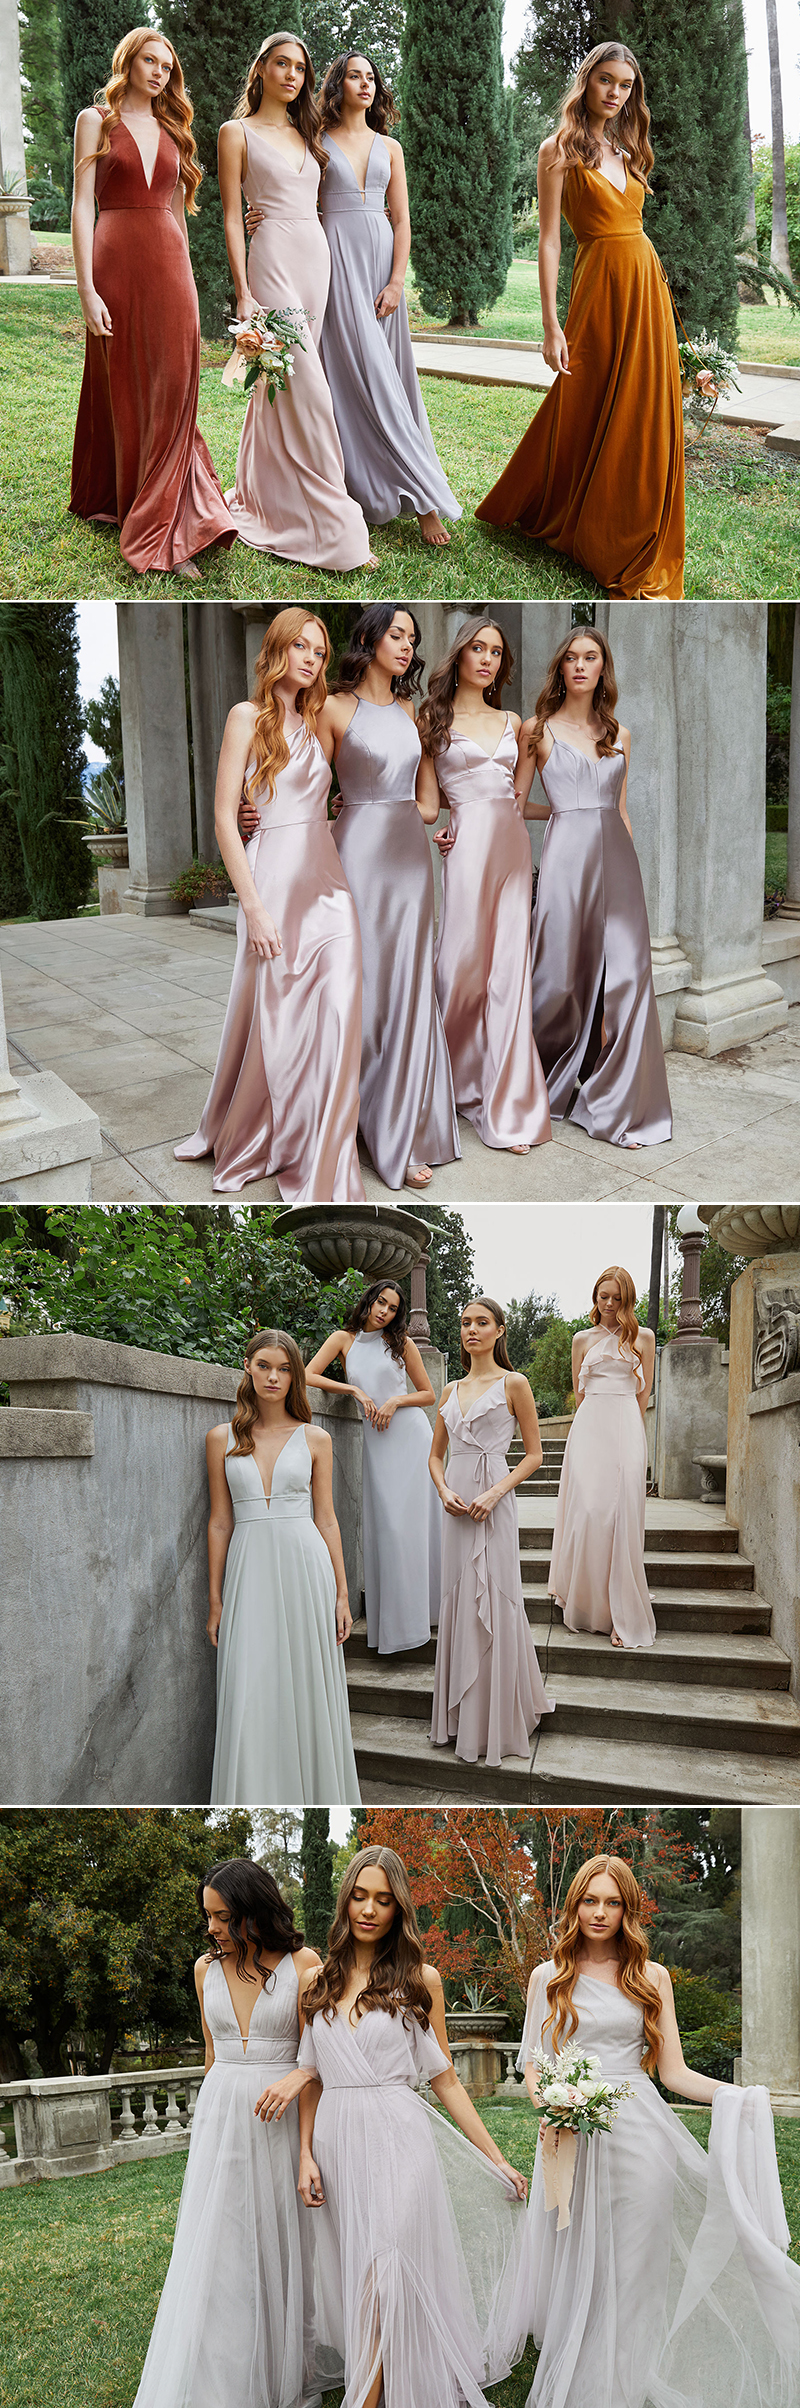 Best Places To Buy Bridesmaid Dresses Online for Any Budget